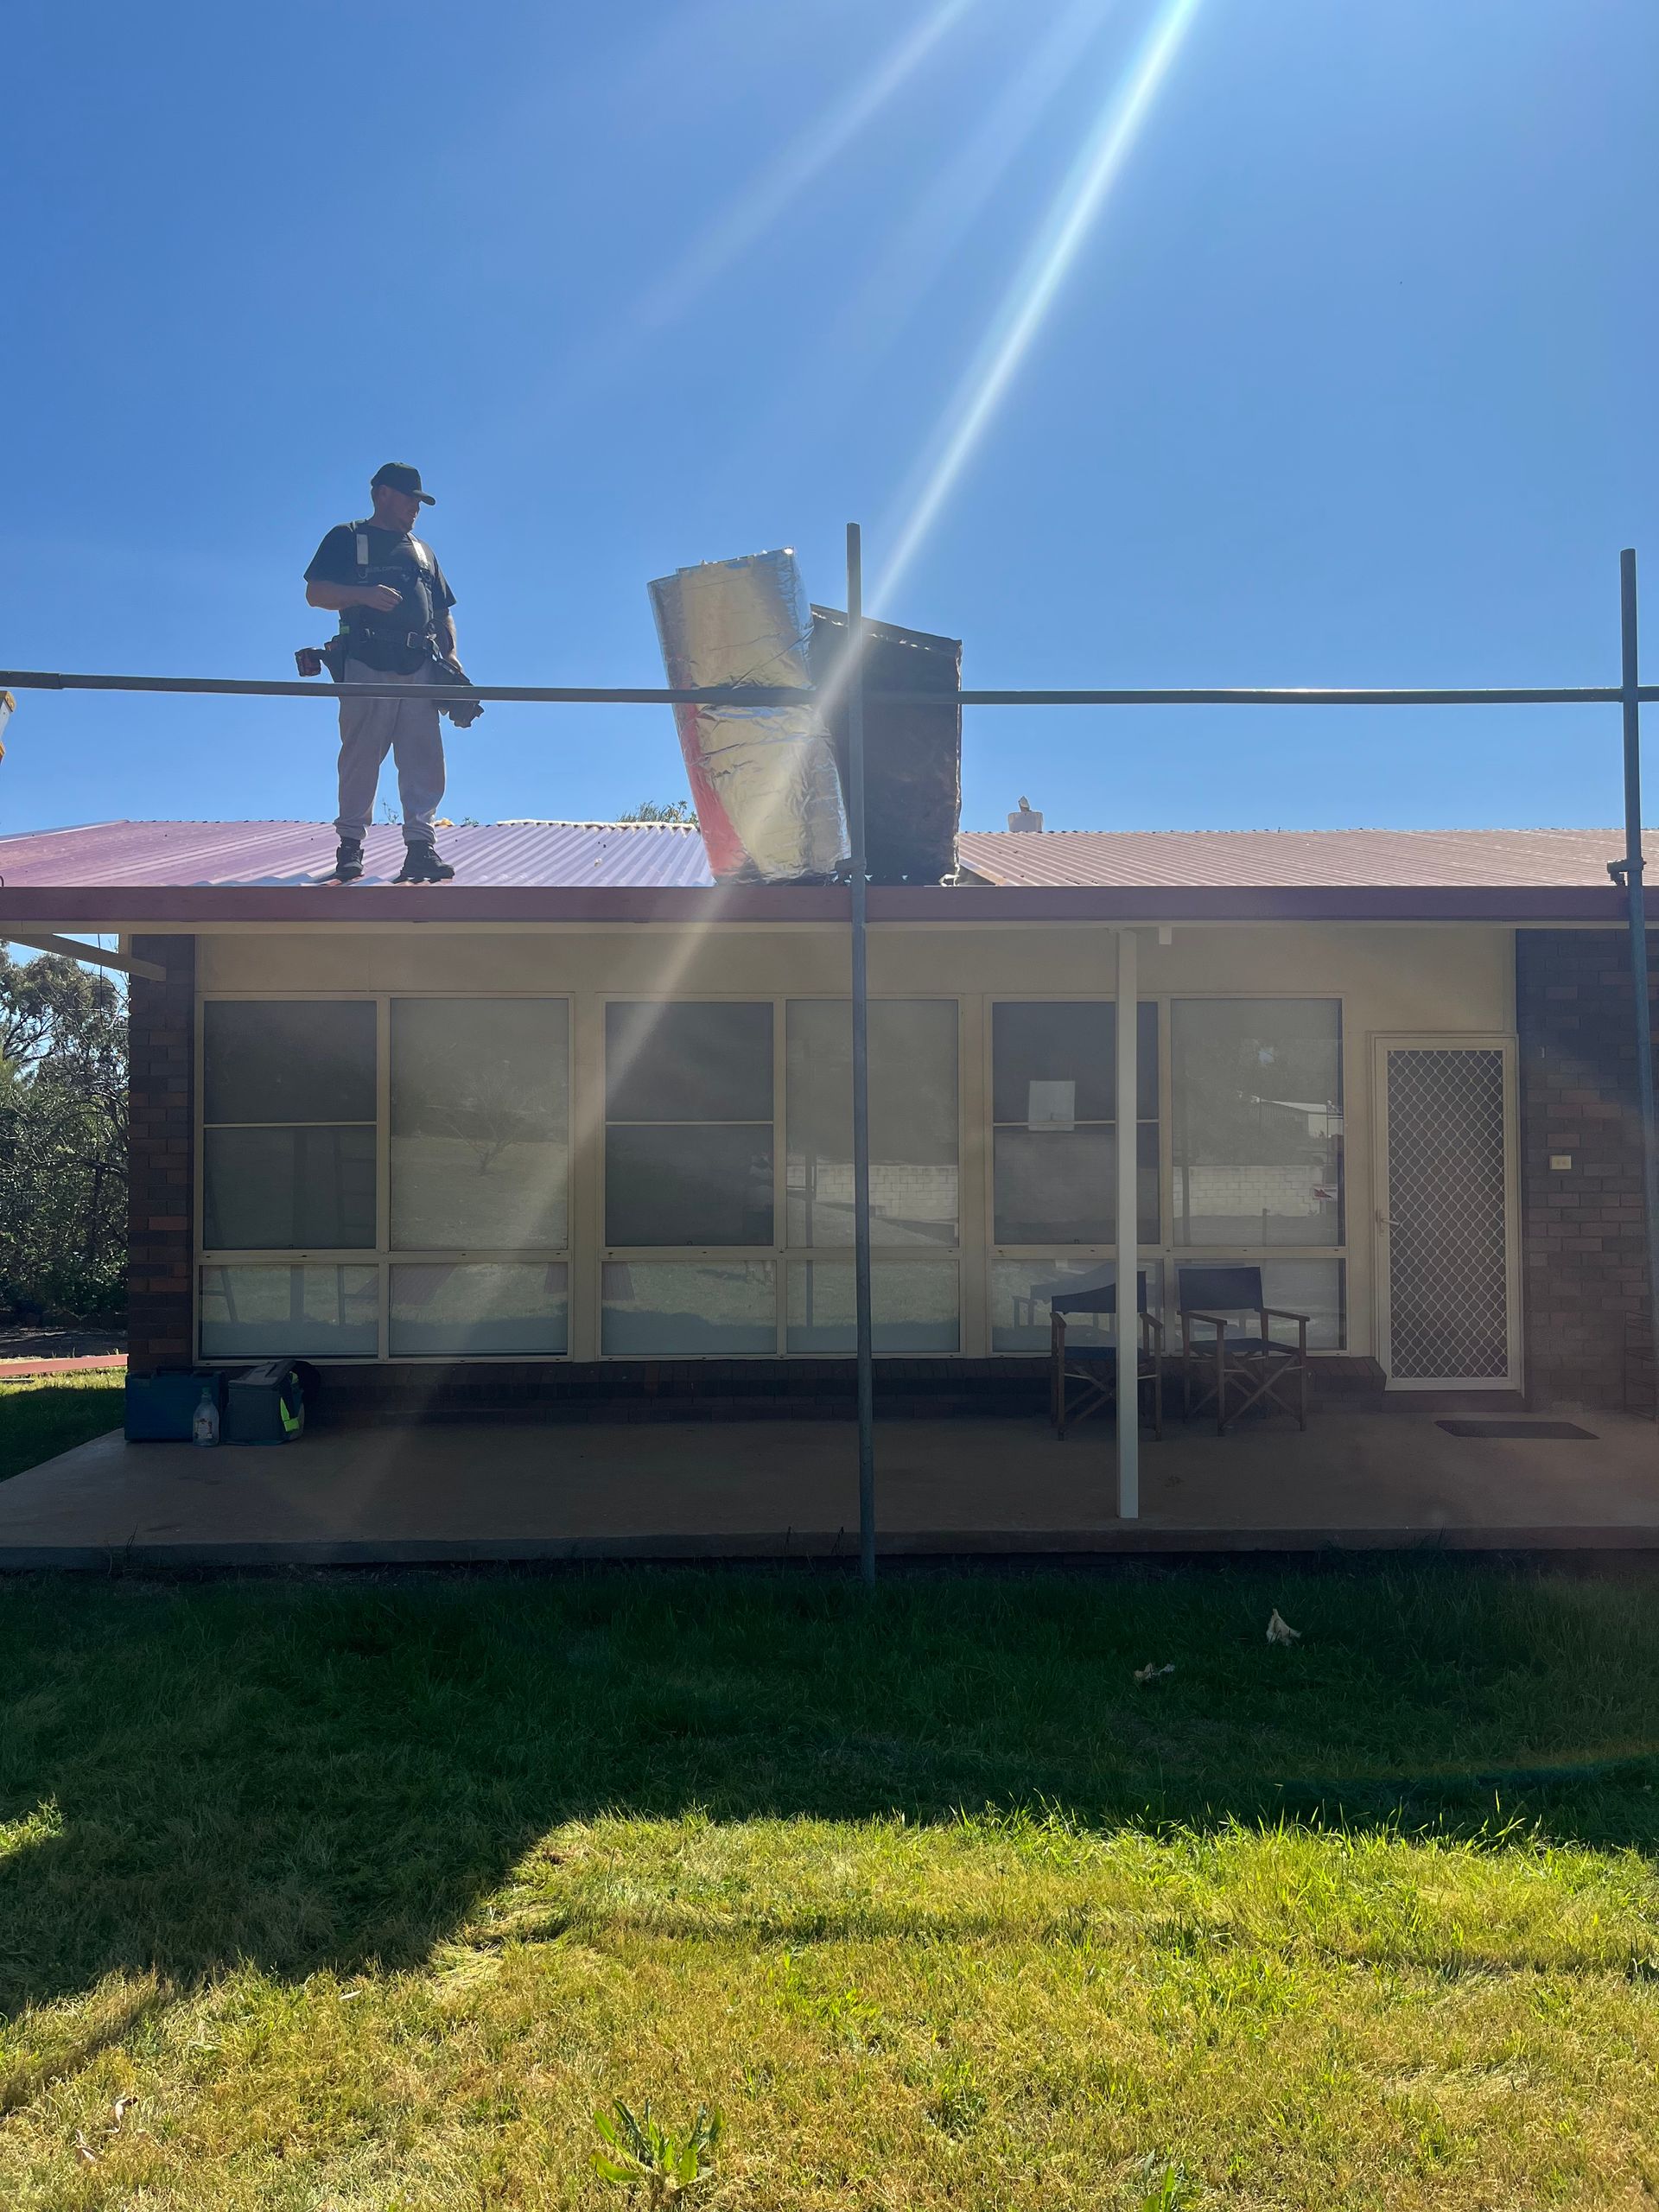 Worker on Roof repairing it — Roofer in Forbes, NSW